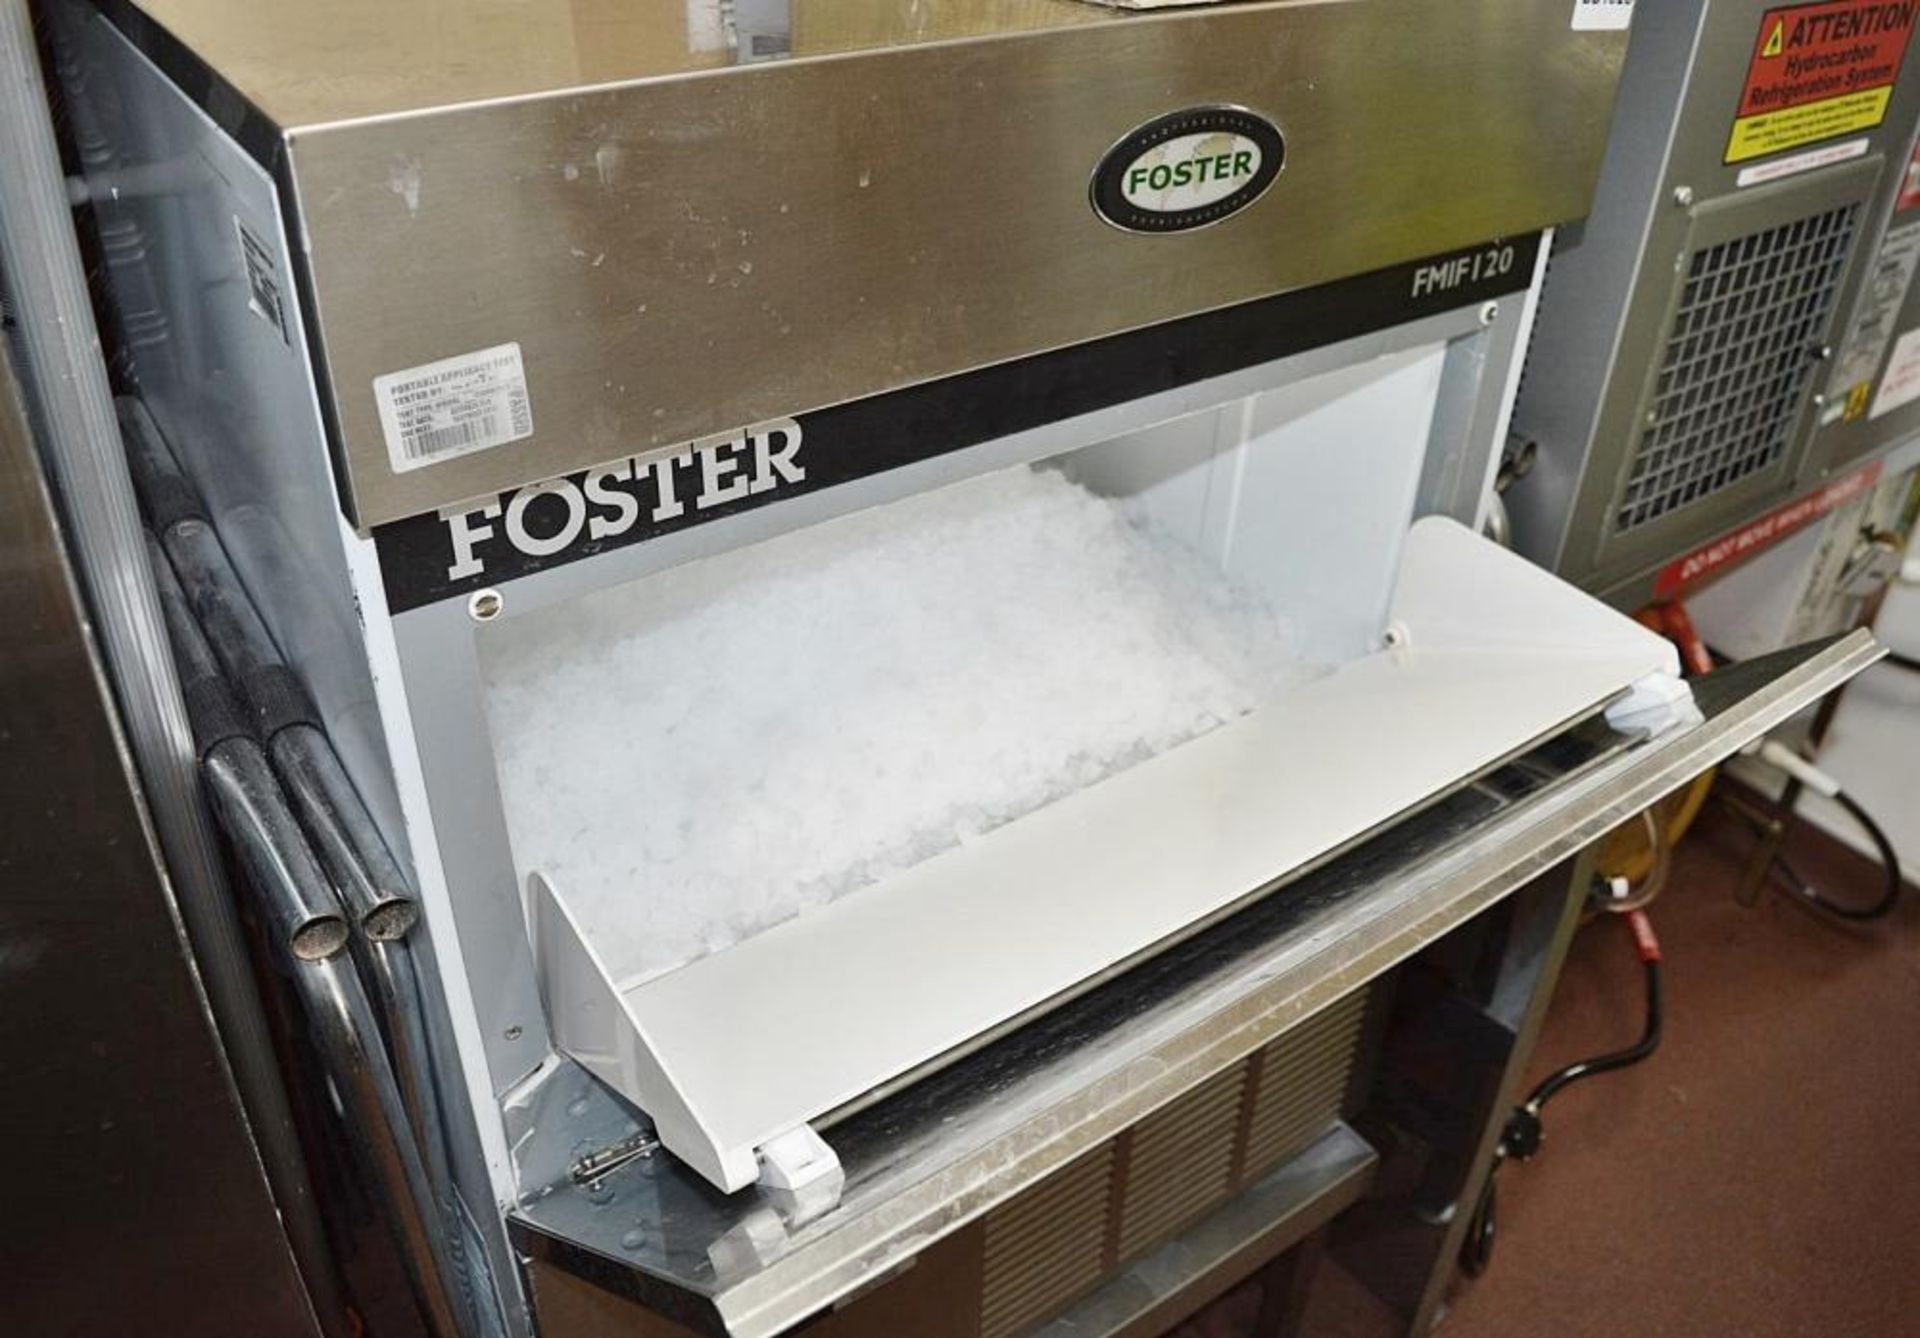 1 x Foster Modular Air-Cooled Ice Cube Maker - Model F132 With SB105 Bin - 130kg Output and 100kg St - Image 5 of 10